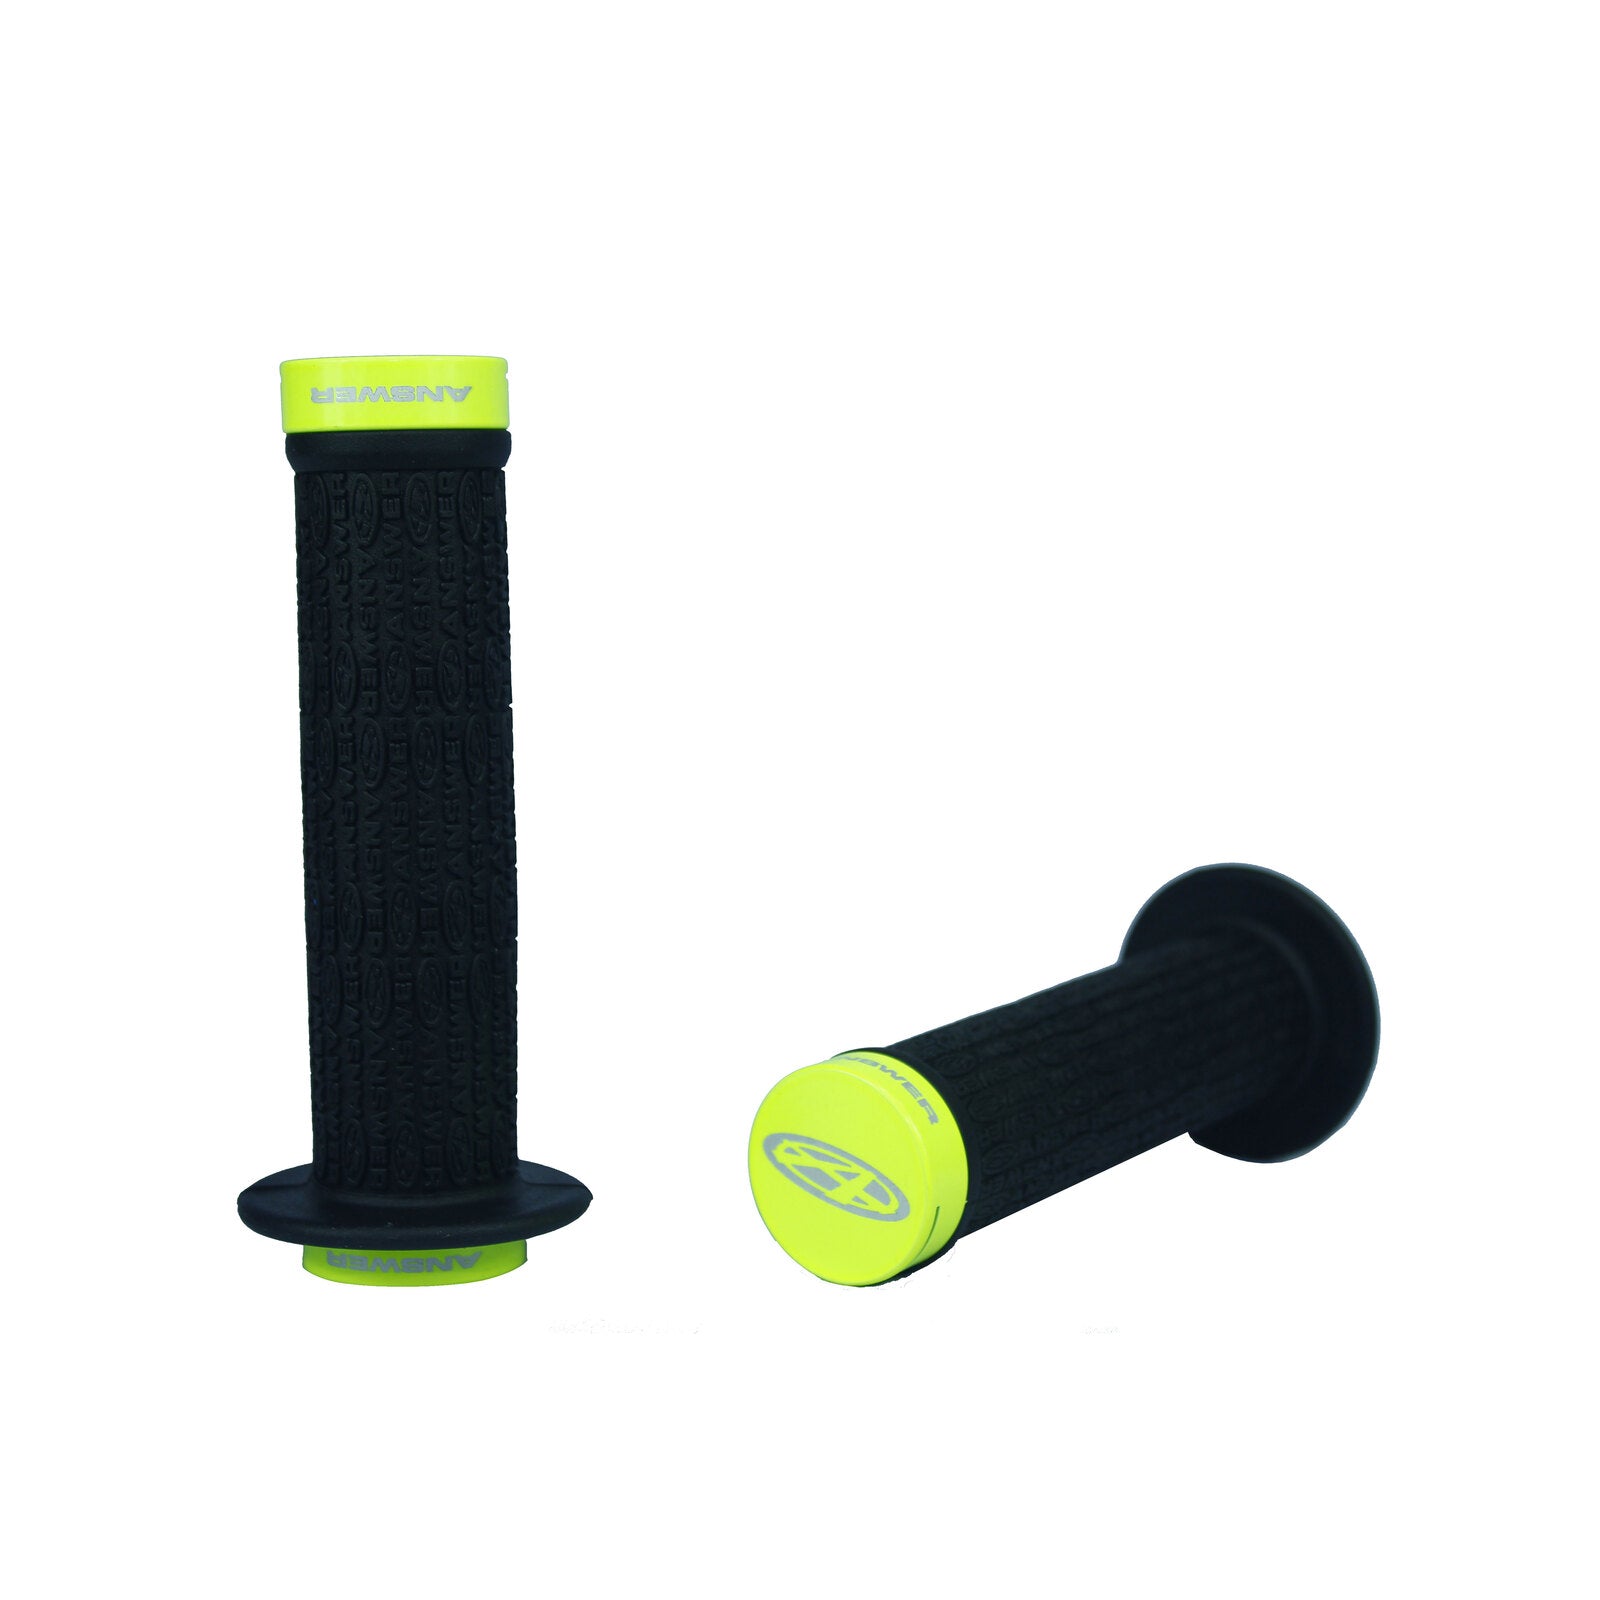 A pair of Answer Mini Lock-On Flanged Grips in black and yellow on a white background.